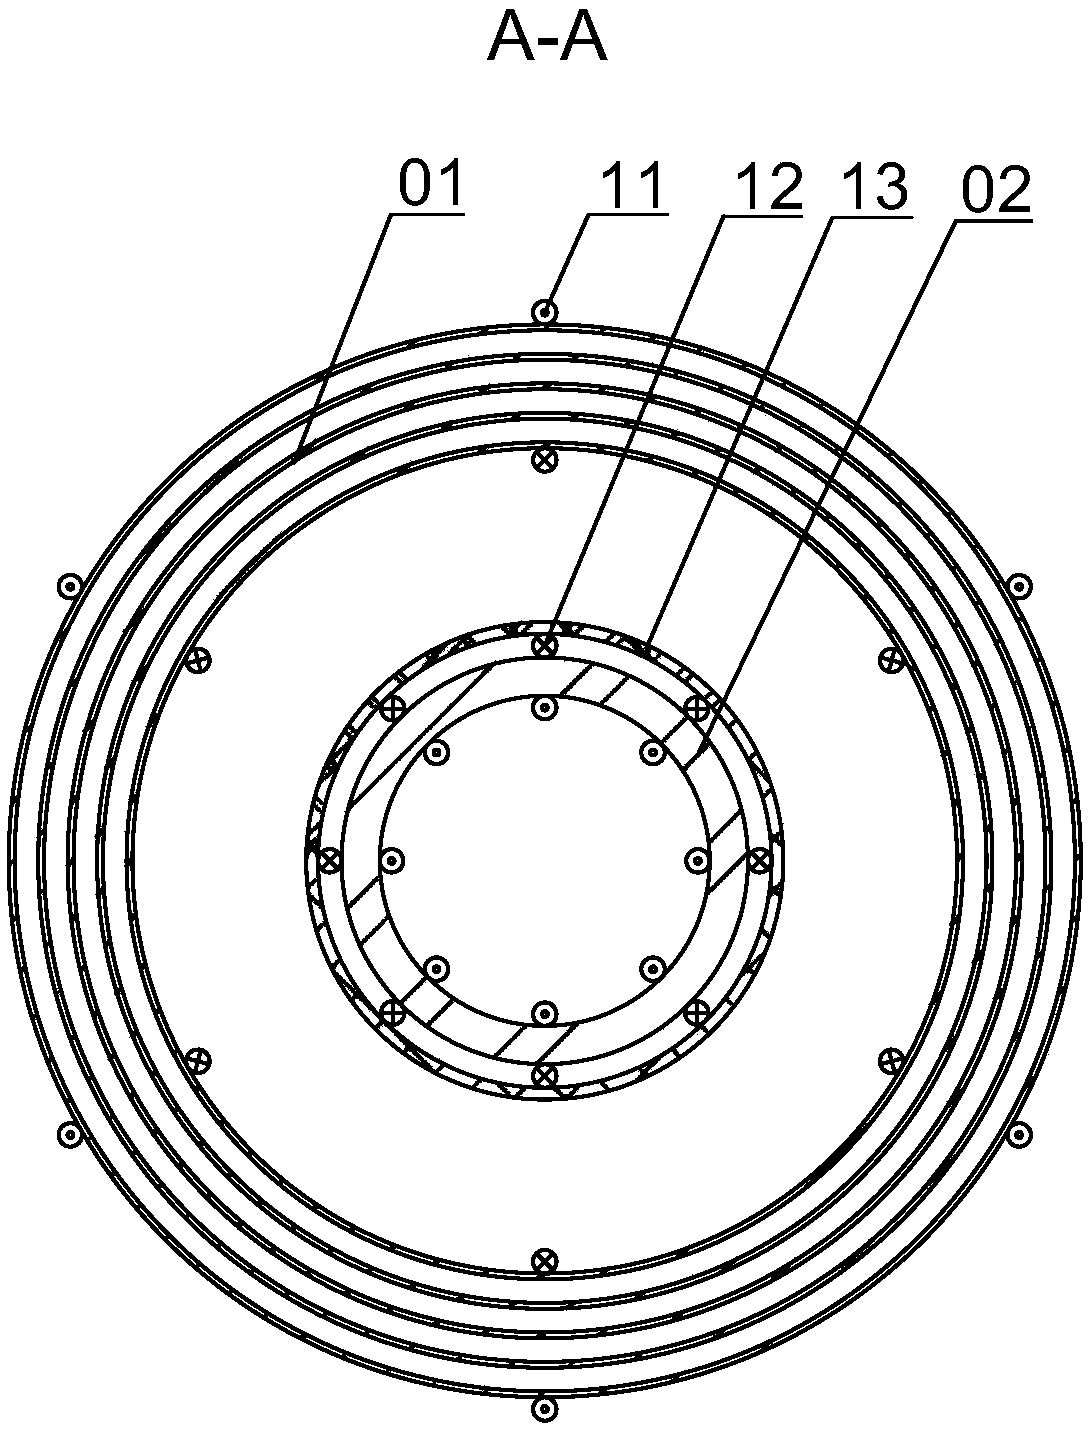 Degaussing coil device for ferrite-permalloy composite magnetic shielding barrel